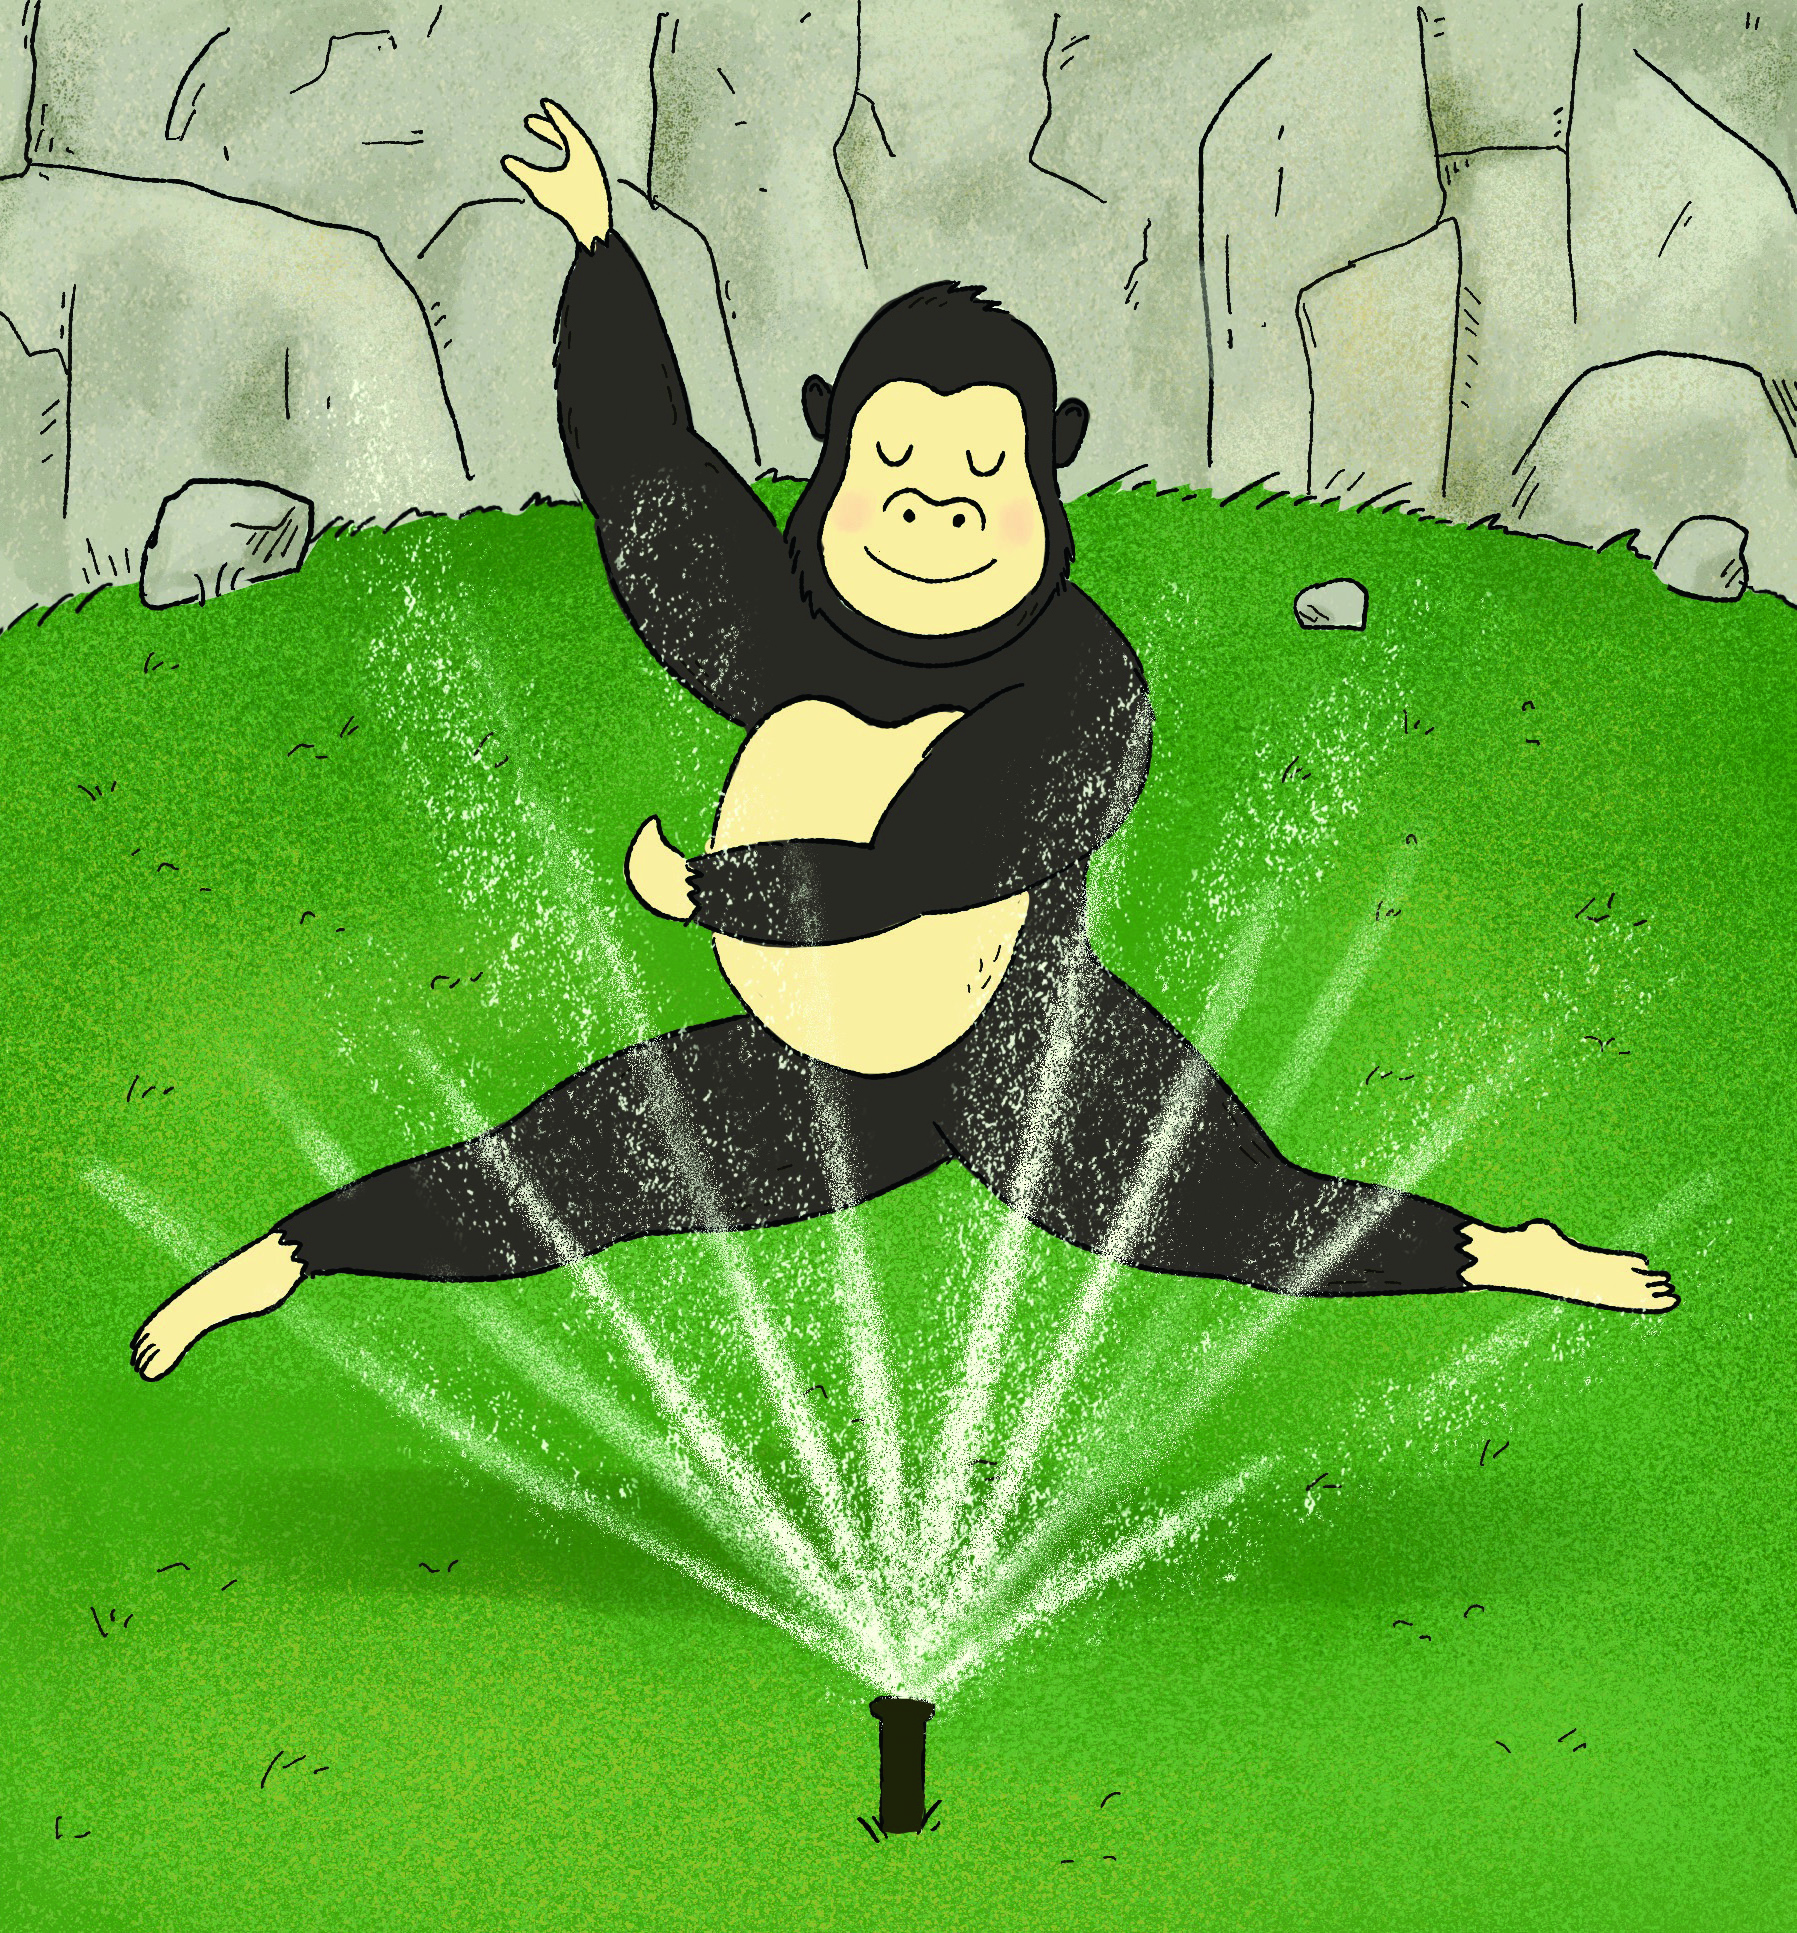 In a cartoon illustration, a large gorilla leaps, with ballerina-like grace. through a sprinkler. Its eyes are closed with a blissful expression.